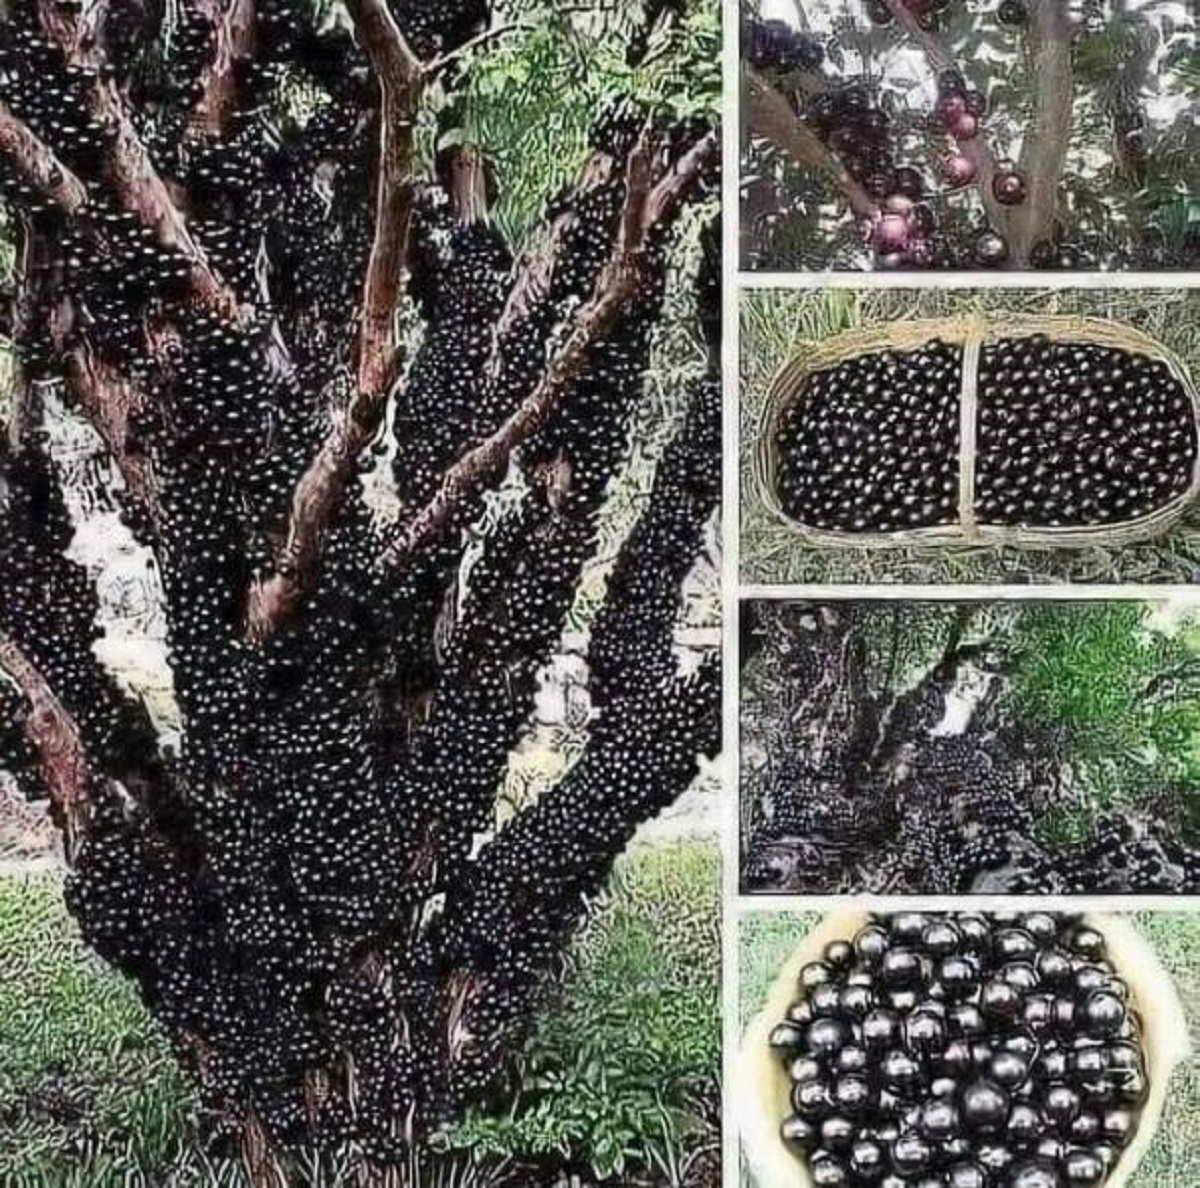 "The Jabuticaba Tree From South America. The Fruit Grows Directly On The Trunk And Branches And Tastes Like Blueberry Yogurt"